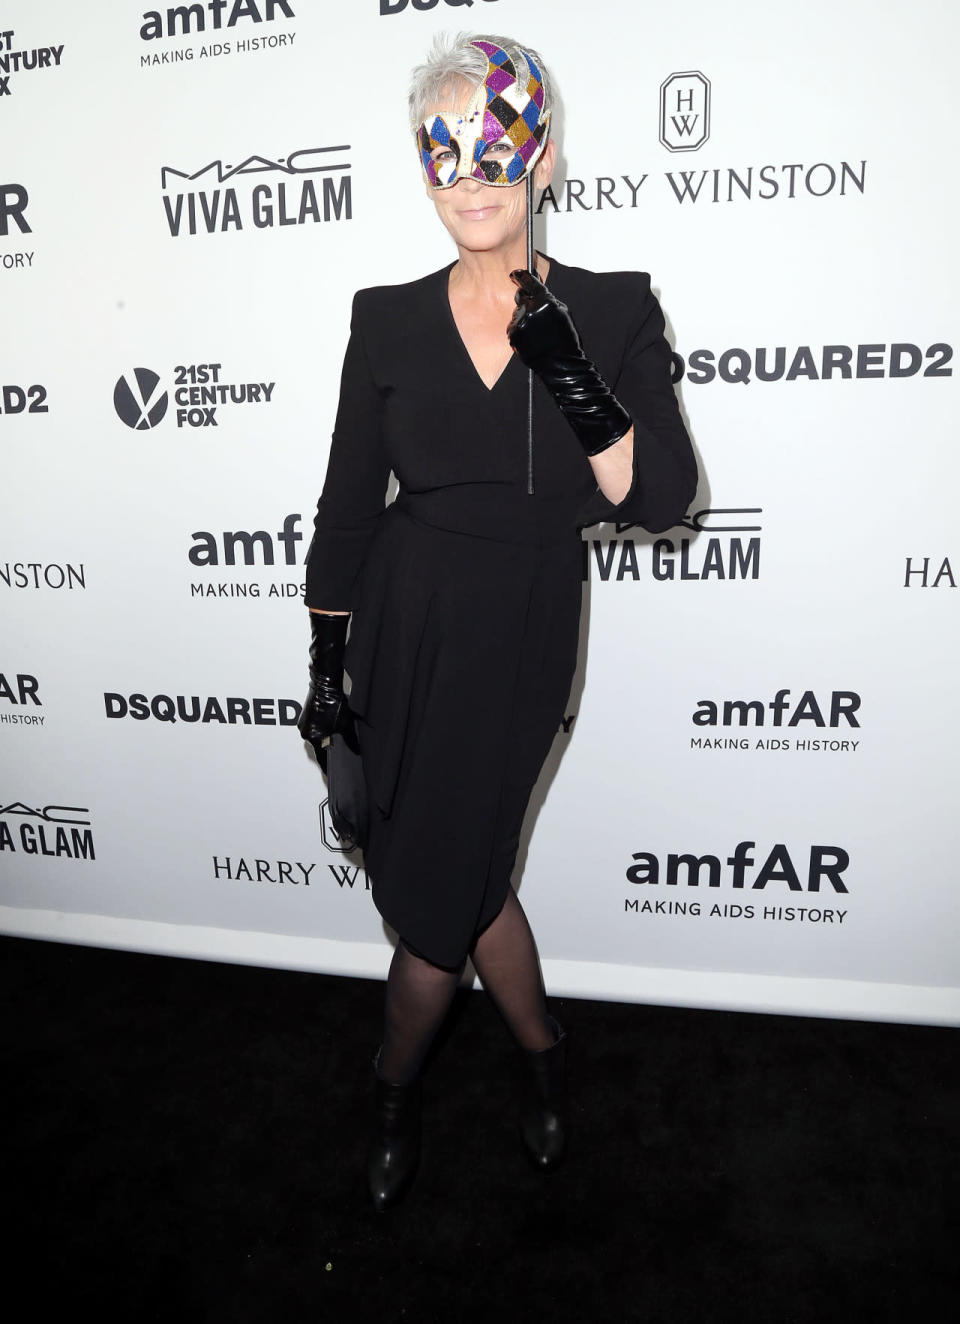 Jamie Lee Curtis added a masquerade touch to her all black ensemble at amfAR’s Inspiration Gala Los Angeles.